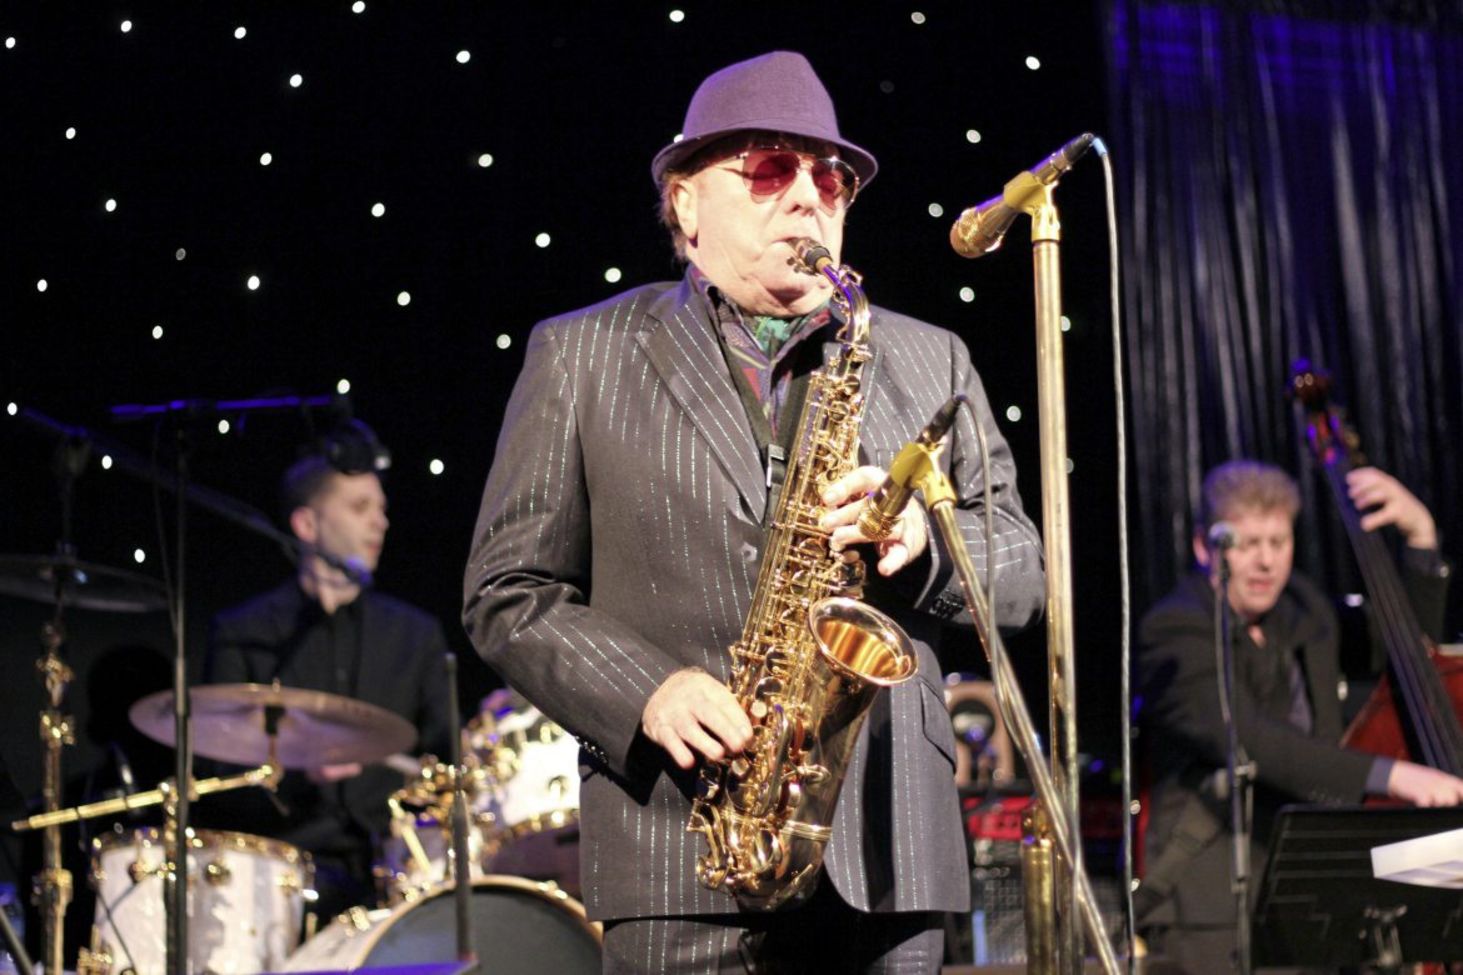 Van Morrison launching legal action against ban on live music in Northern  Ireland, Ents & Arts News